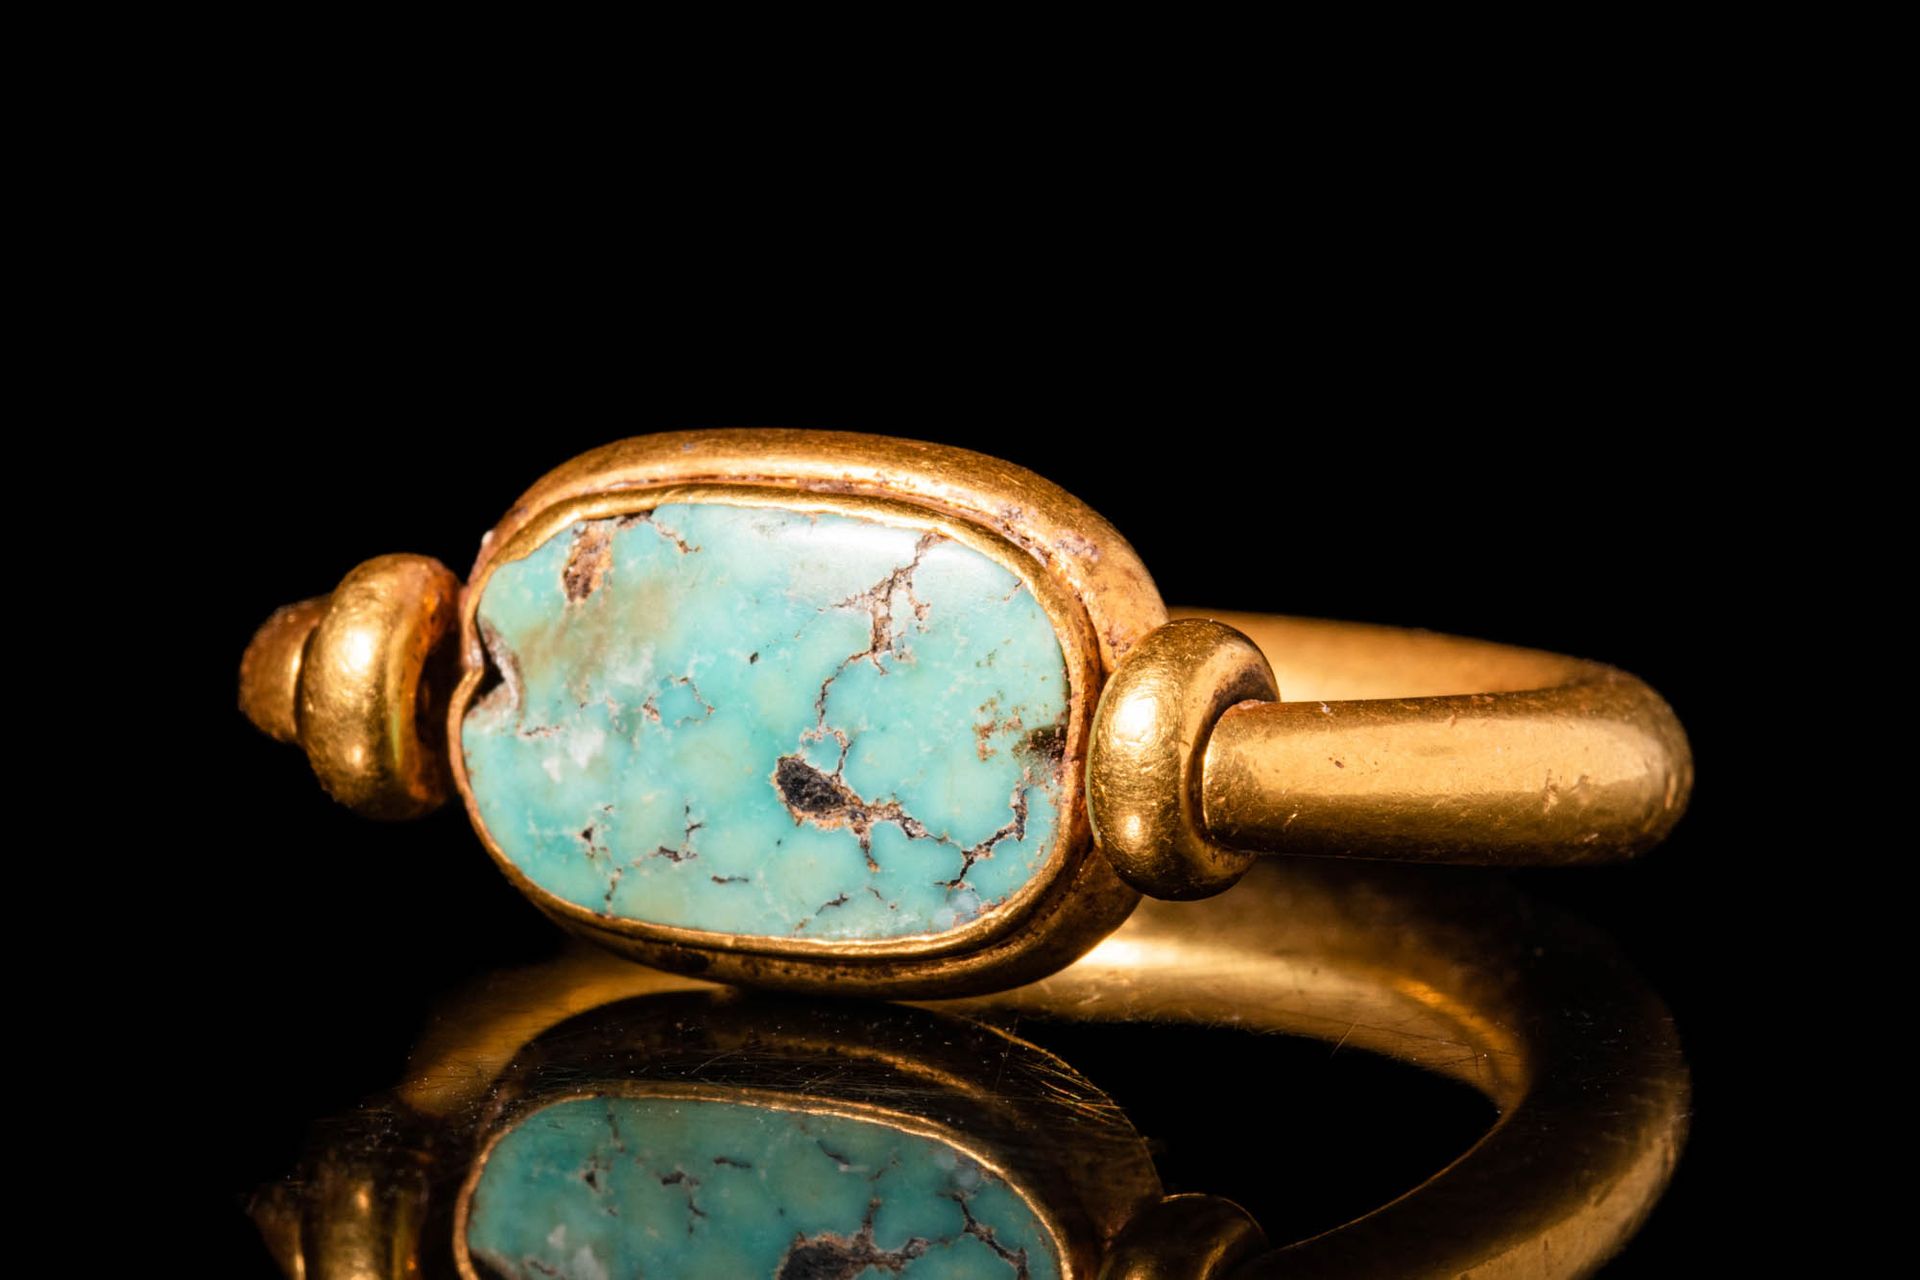 EGYPTIAN GOLD FINGER RING WITH TURQUOISE BEZEL Reino Nuevo, Ca. 1550 - 1069 A.C.&hellip;